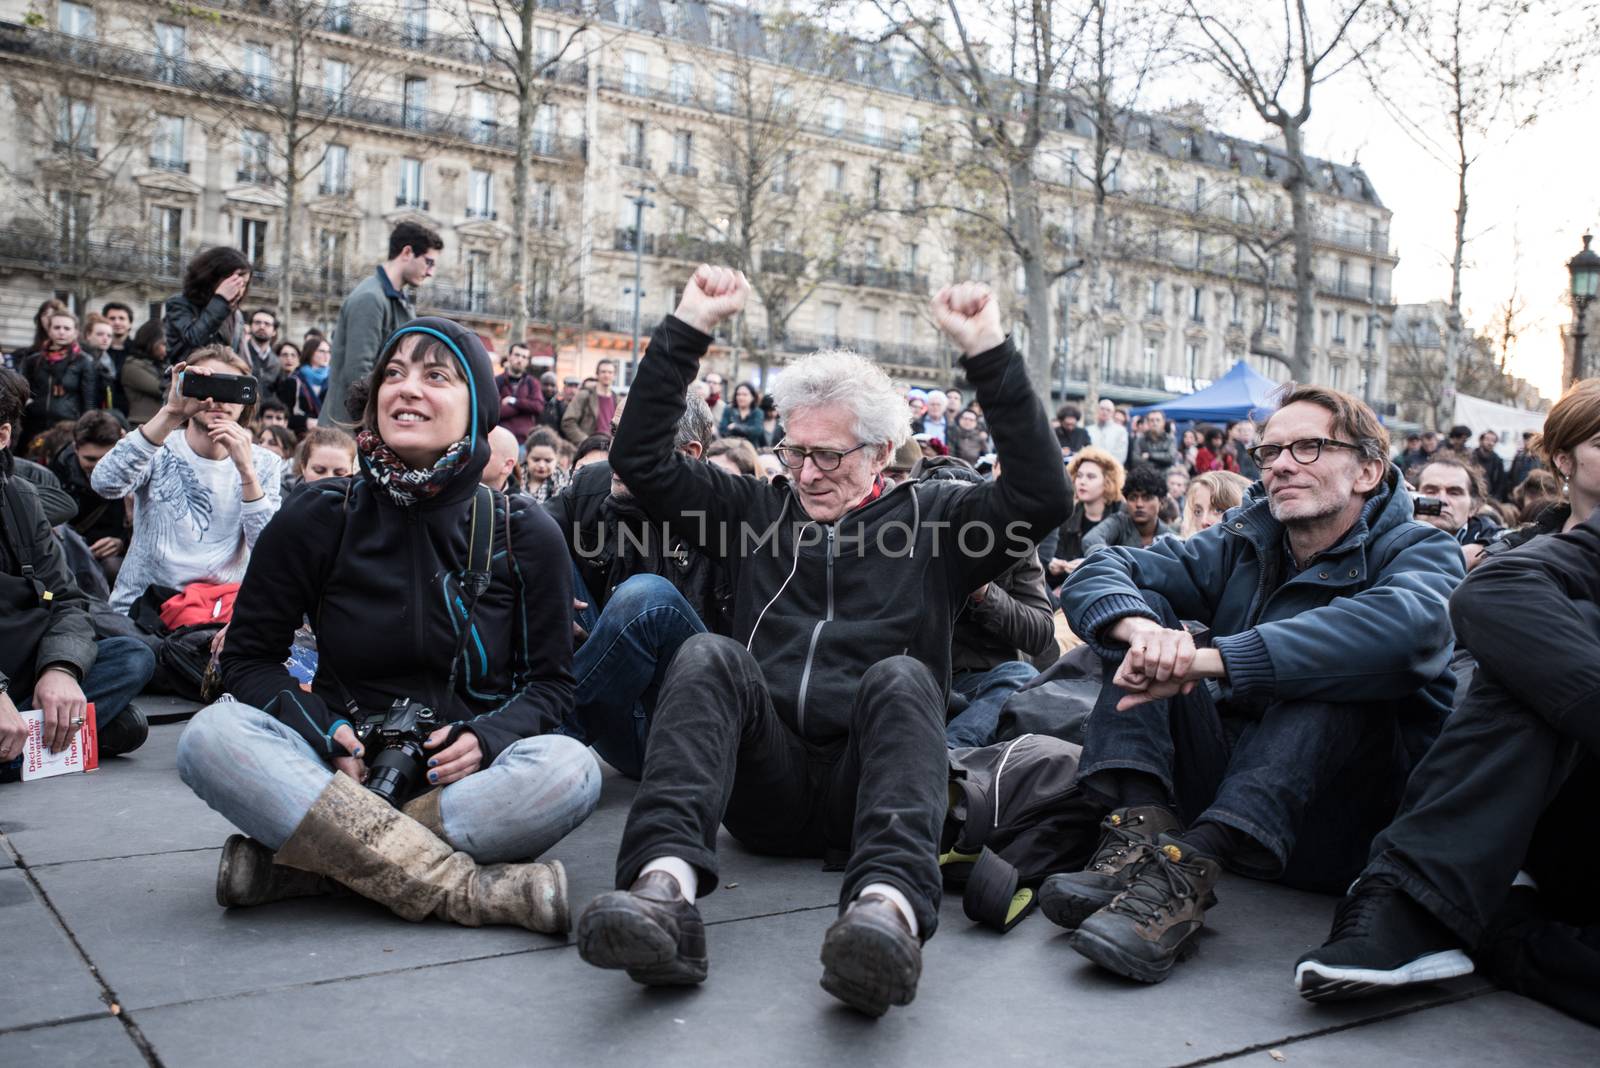 FRANCE, Paris: Jean-Baptiste Eyraud (c), president of French association Droit au Logement (Right to housing), takes part in the 14th Nuit Debout (Up All Night) movement on the Place de la Republique in Paris on April 13, 2016. The Nuit Debout or Up All Night protests began in opposition to the Socialist government's labour reforms seen as threatening workers' rights, but have since gathered a number of causes, from migrants' rights to anti-globalisation.